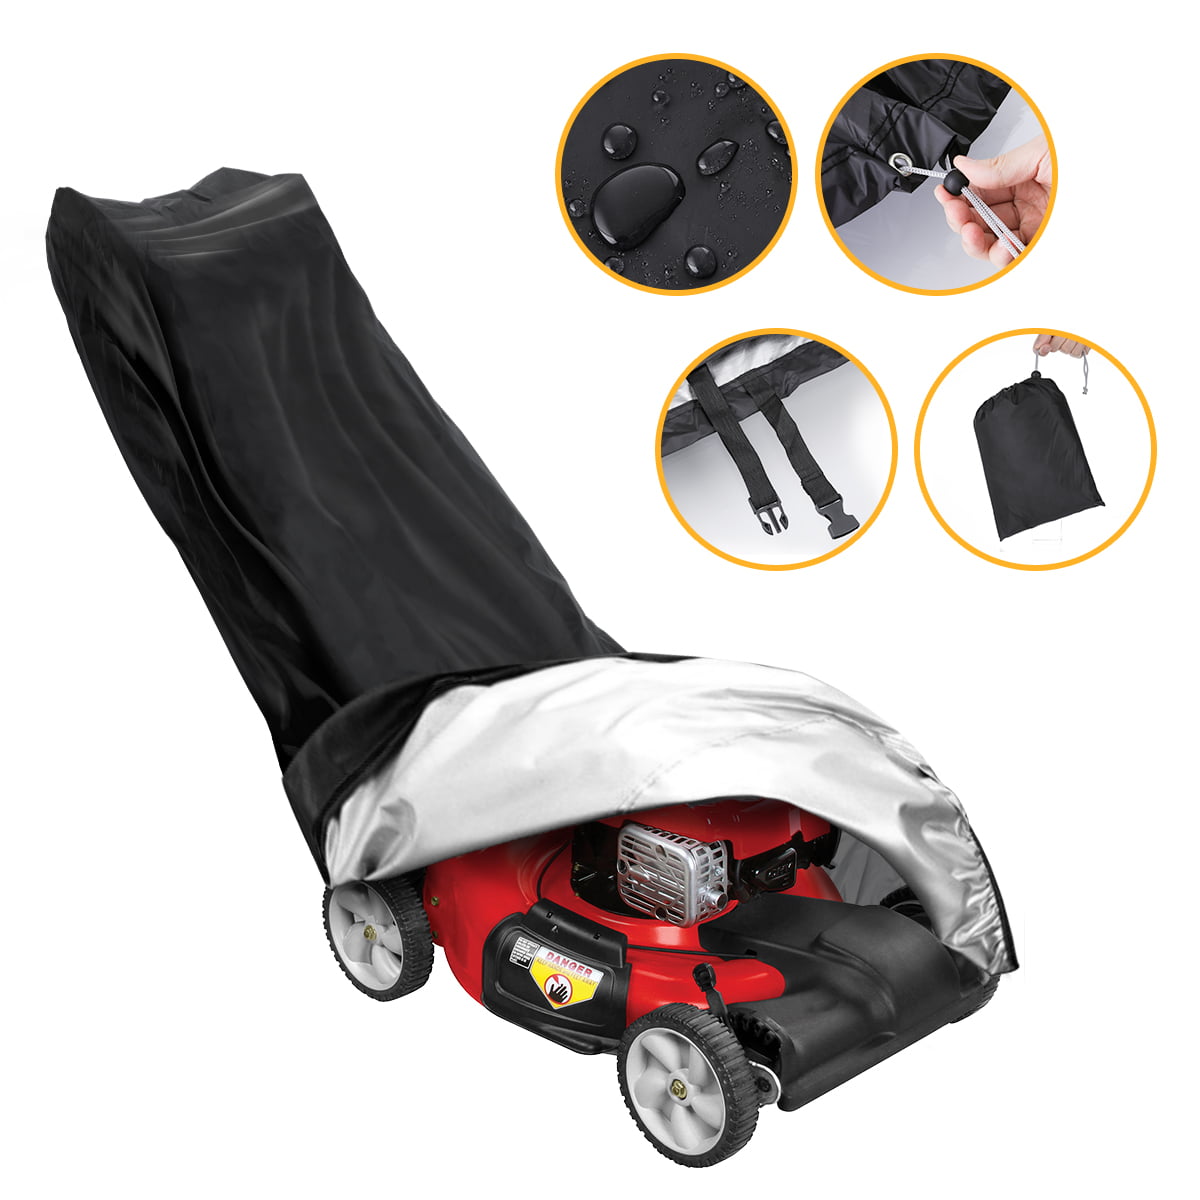 UV Protection Snow Rain Wind Dust Water Birds,Universal Size with Drawstring,Storage Bag and Buckle LIUHE Lawn Mower Cover Premium Oxford Waterproof Push Mower Cover 